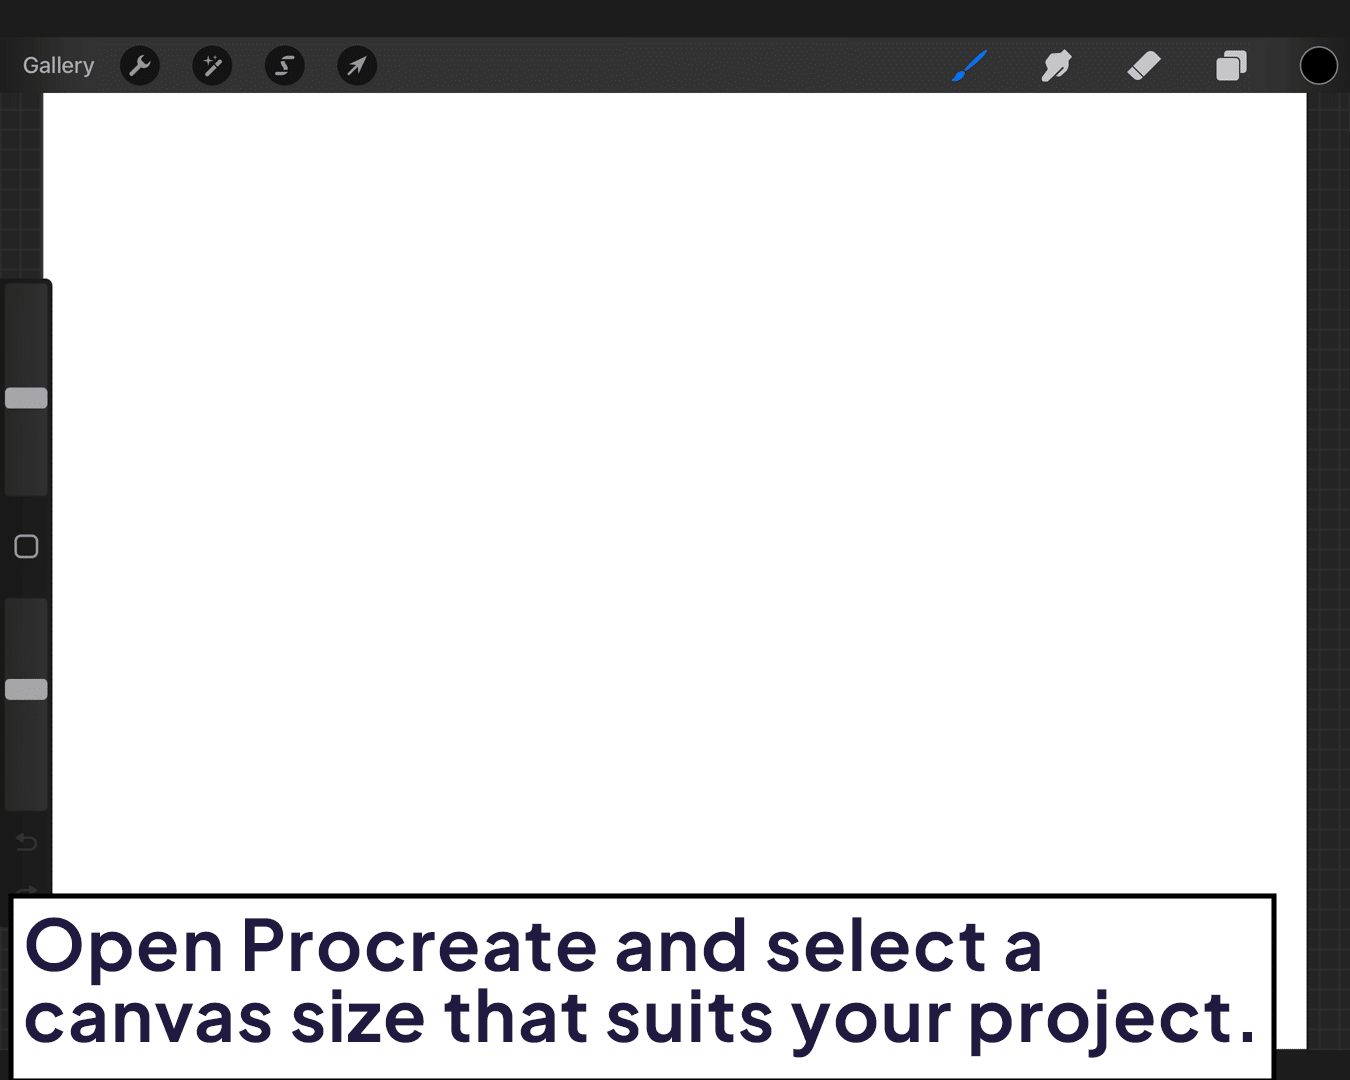 Selecting a canvas size